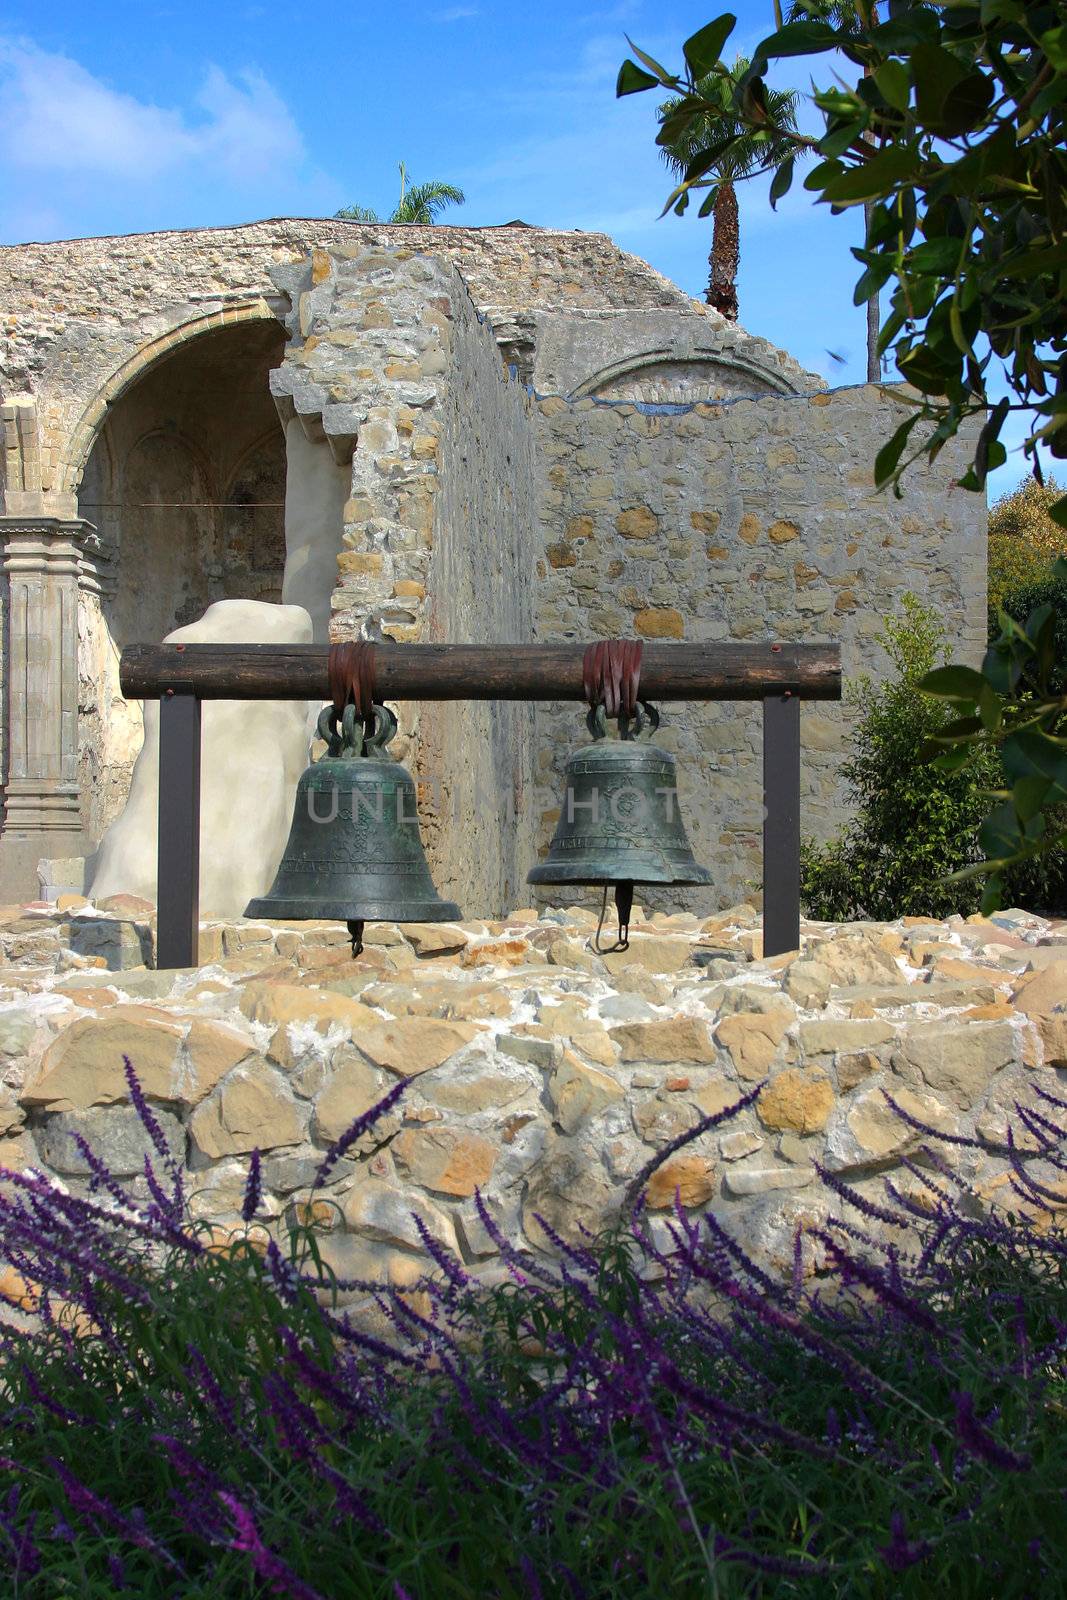 Two Bells hanging at Mission San Juan Capistrano with the ruins in the background.